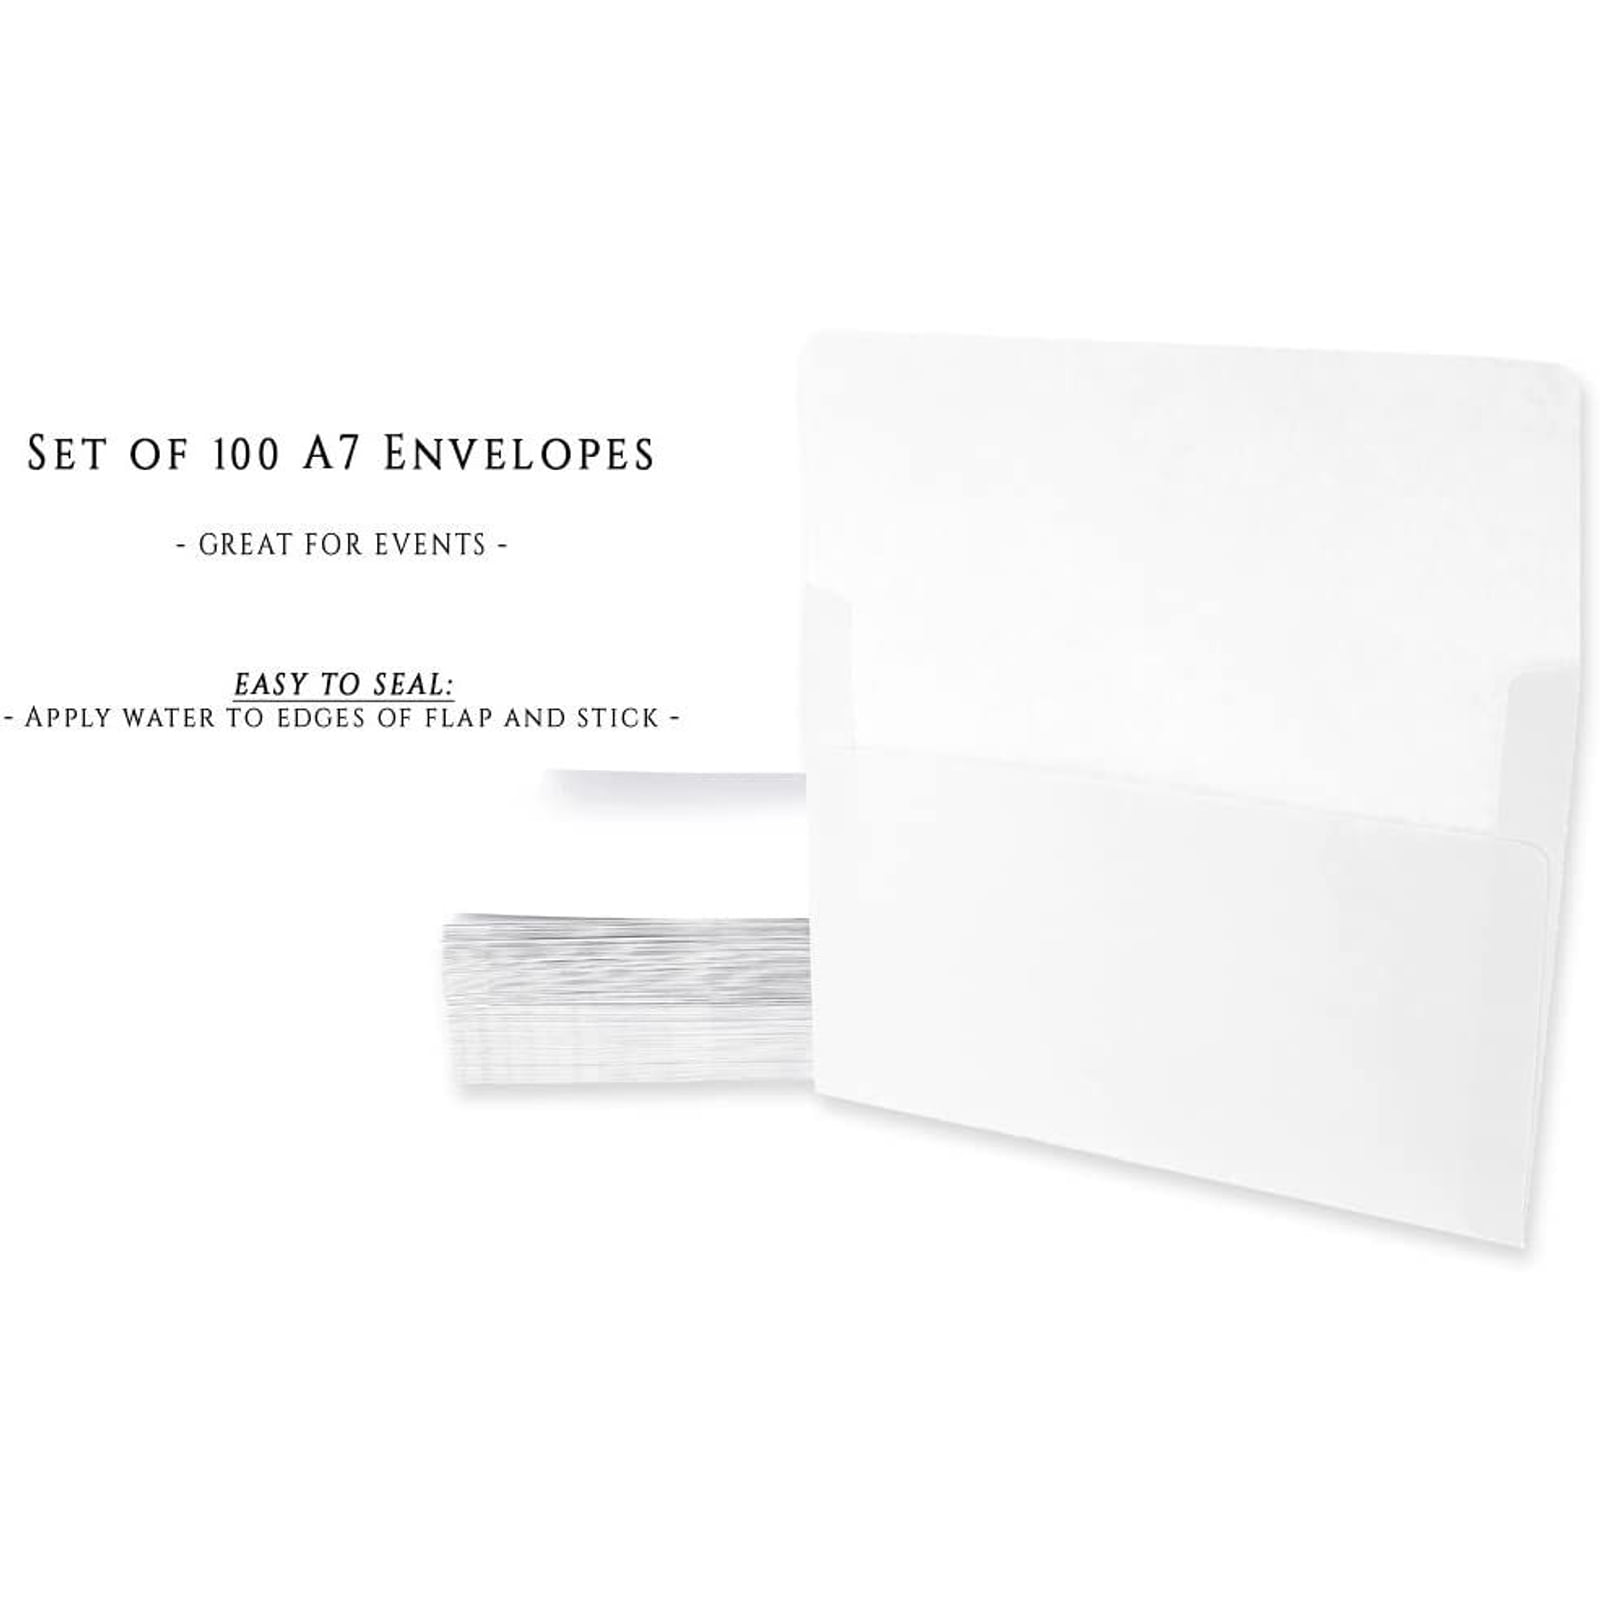 Envelopes A7 (5.25x7.25 for 5x7 cards) - IVORY 100 Pack Wedding  Invitation 